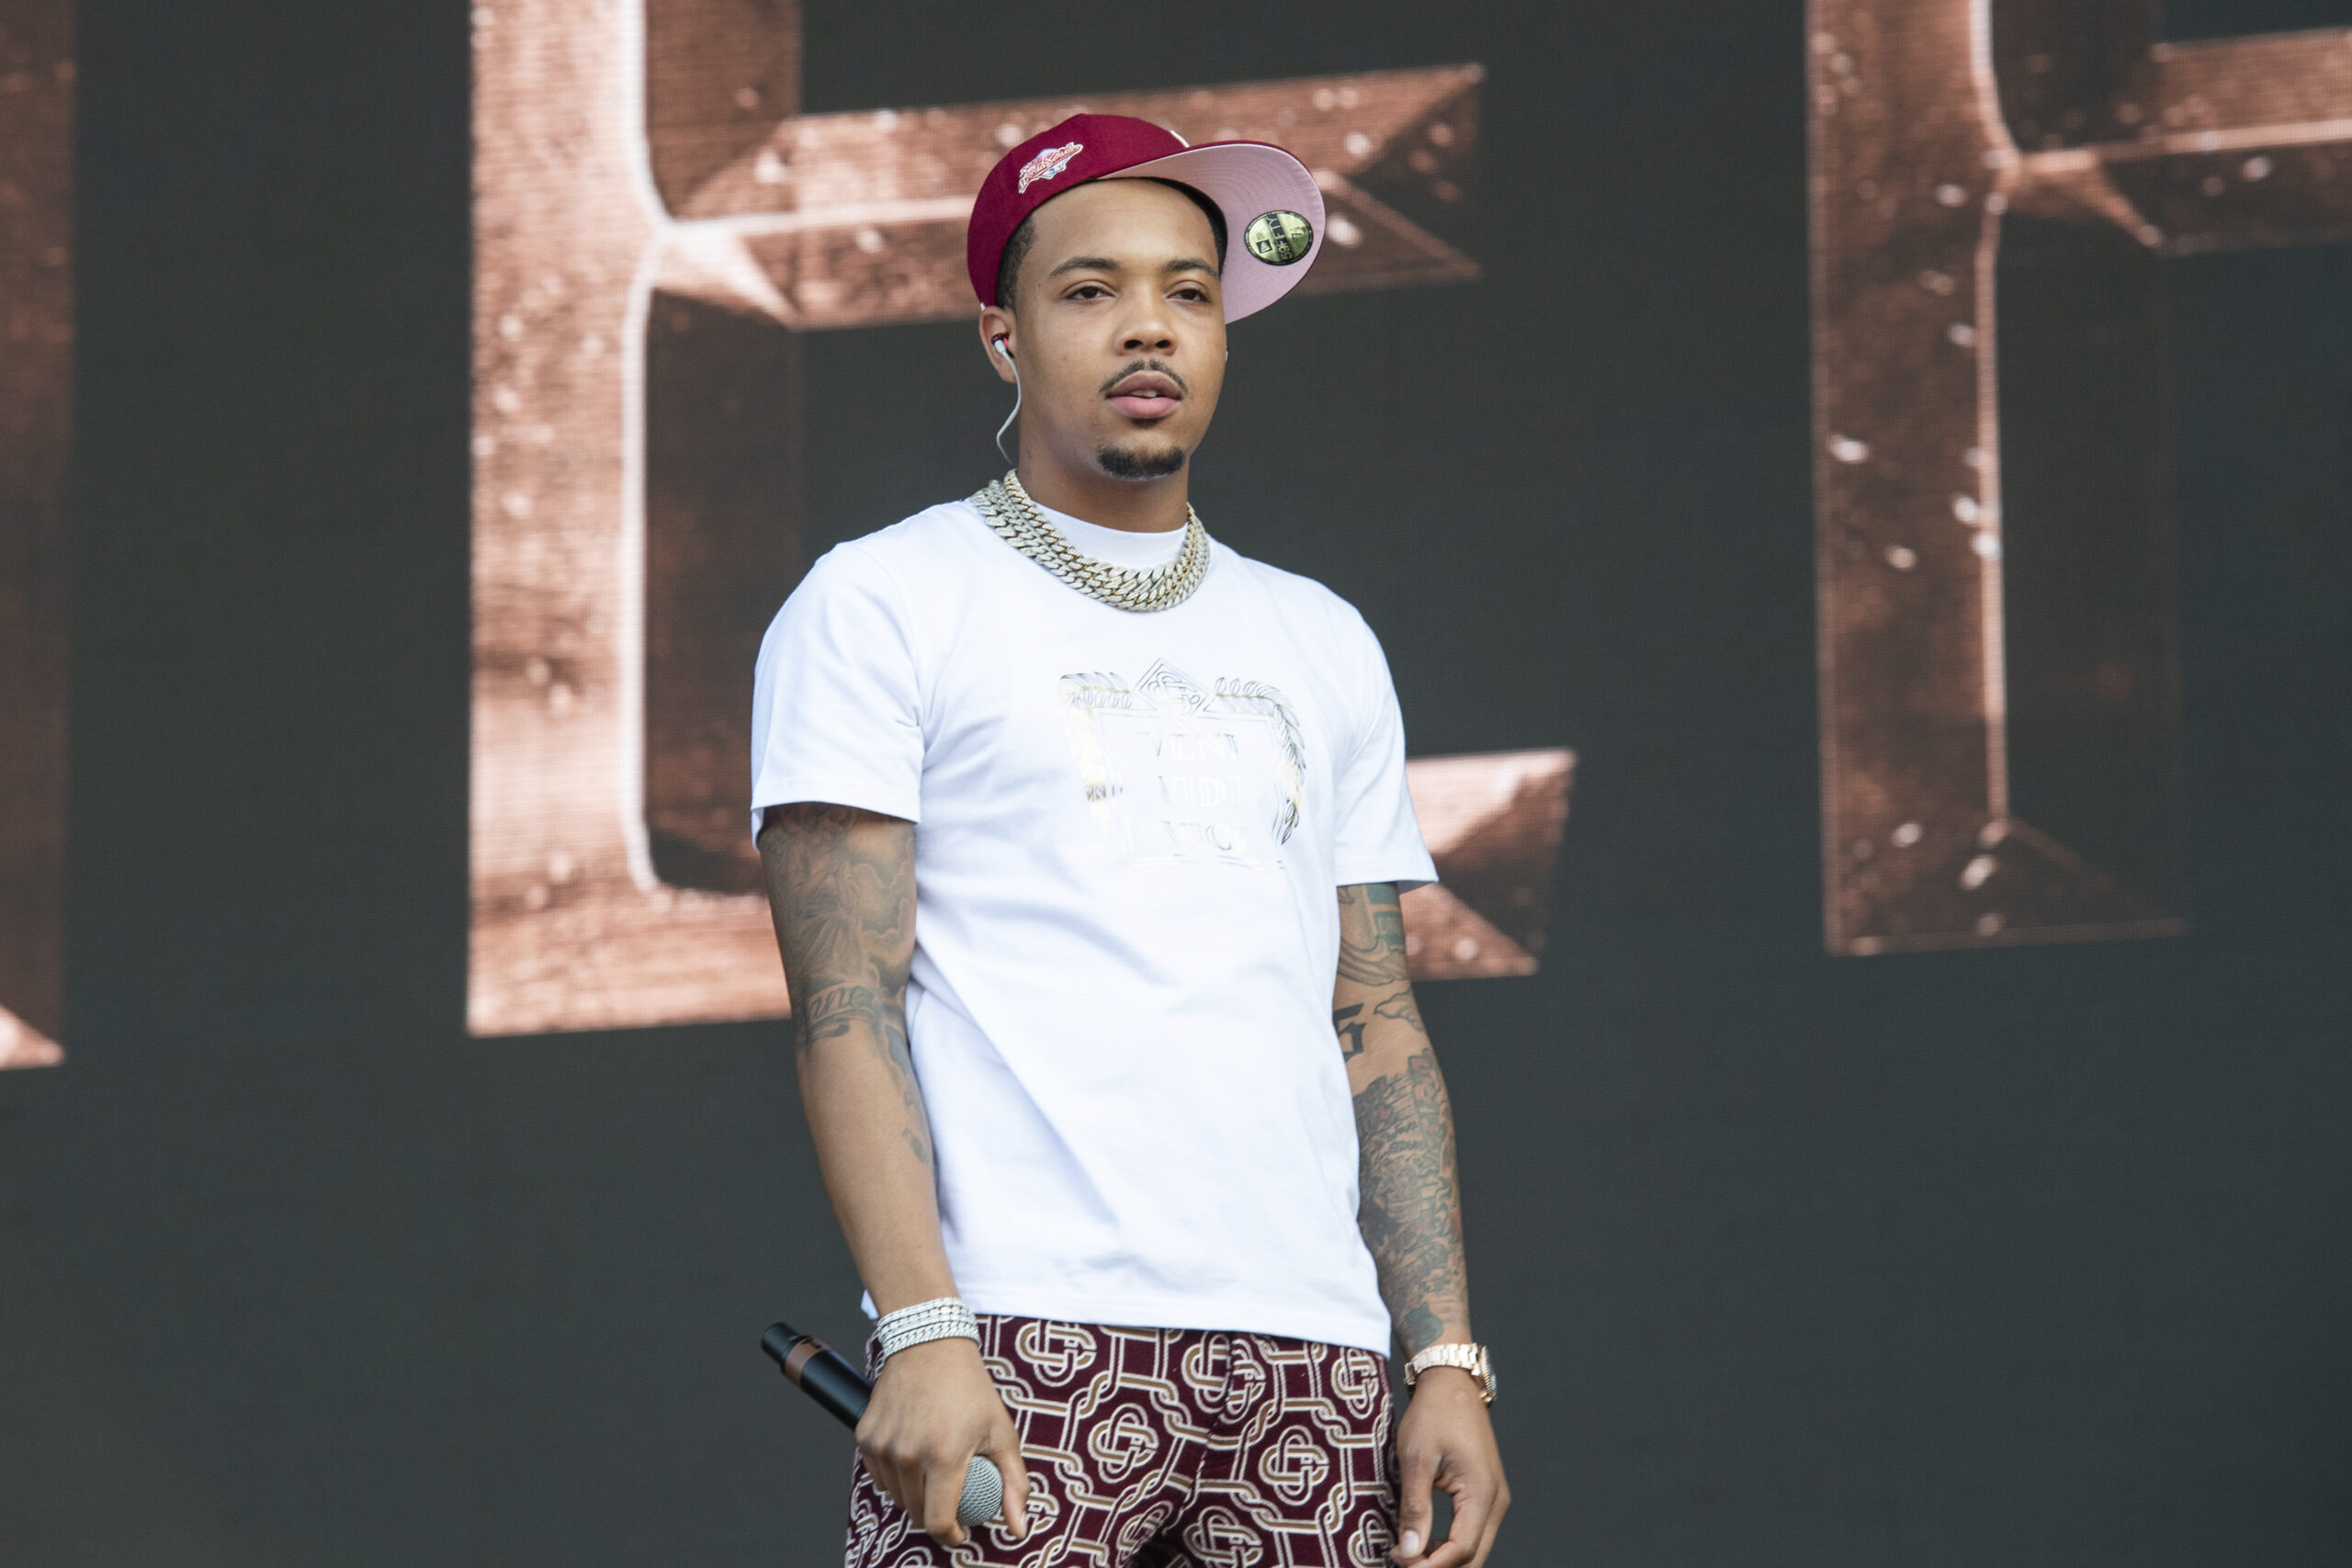 FILE - Rapper G Herbo performs on Day 4 of the Lollapalooza Music Festival, Aug. 1, 2021, at Grant Park in Chicago. The rapper could face just over a year in jail after pleading his role in a scheme that used stolen credit card information to pay for an opulent lifestyle including private jets and designer puppies. (Photo by Amy Harris/Invision/AP, File)